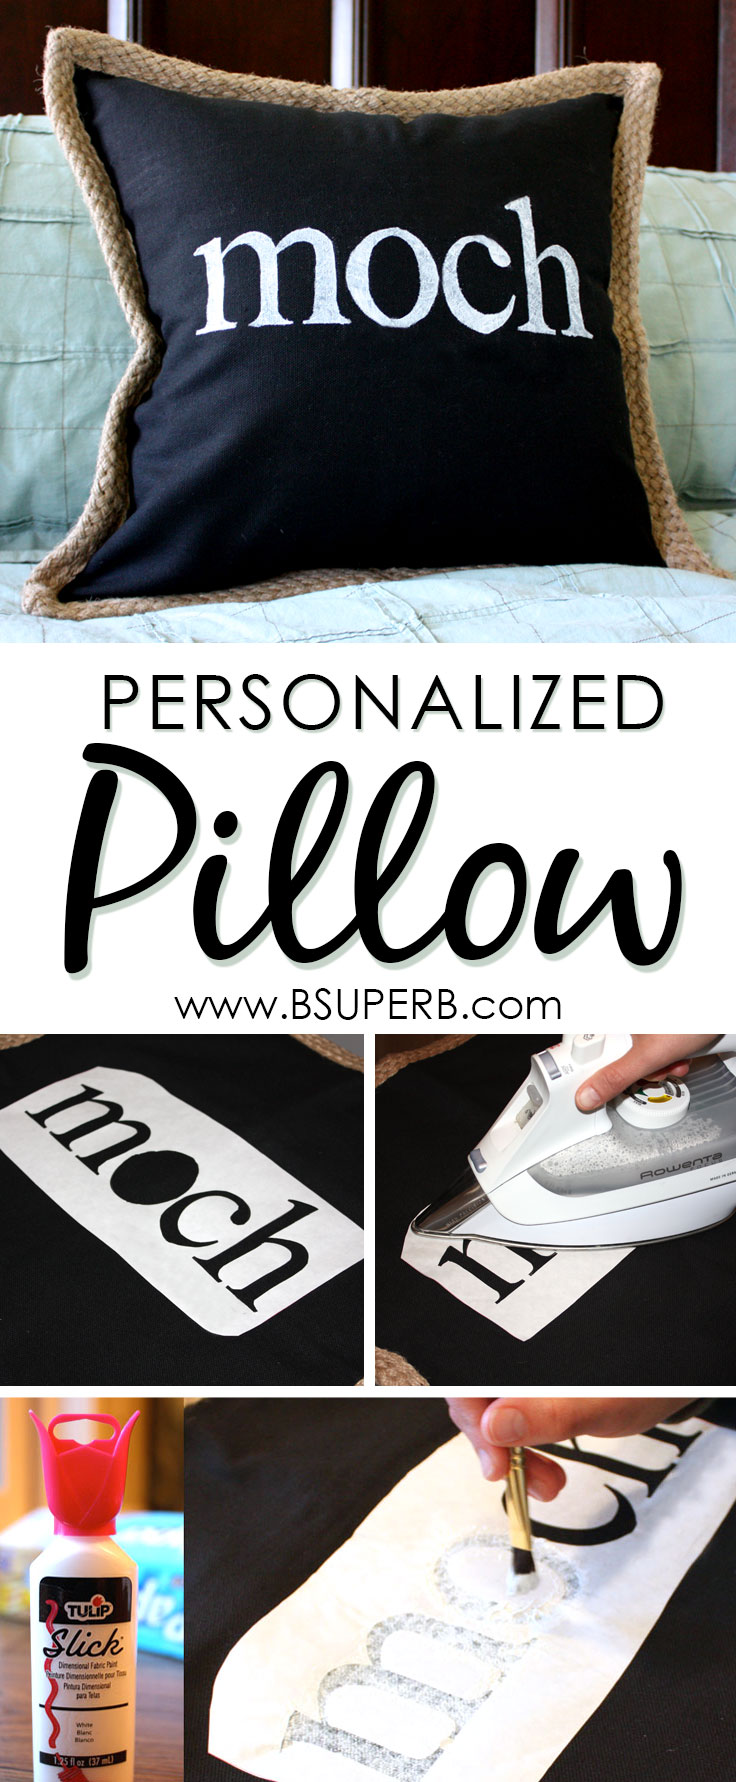 Personalized pillow made with freezer paper - great gift idea